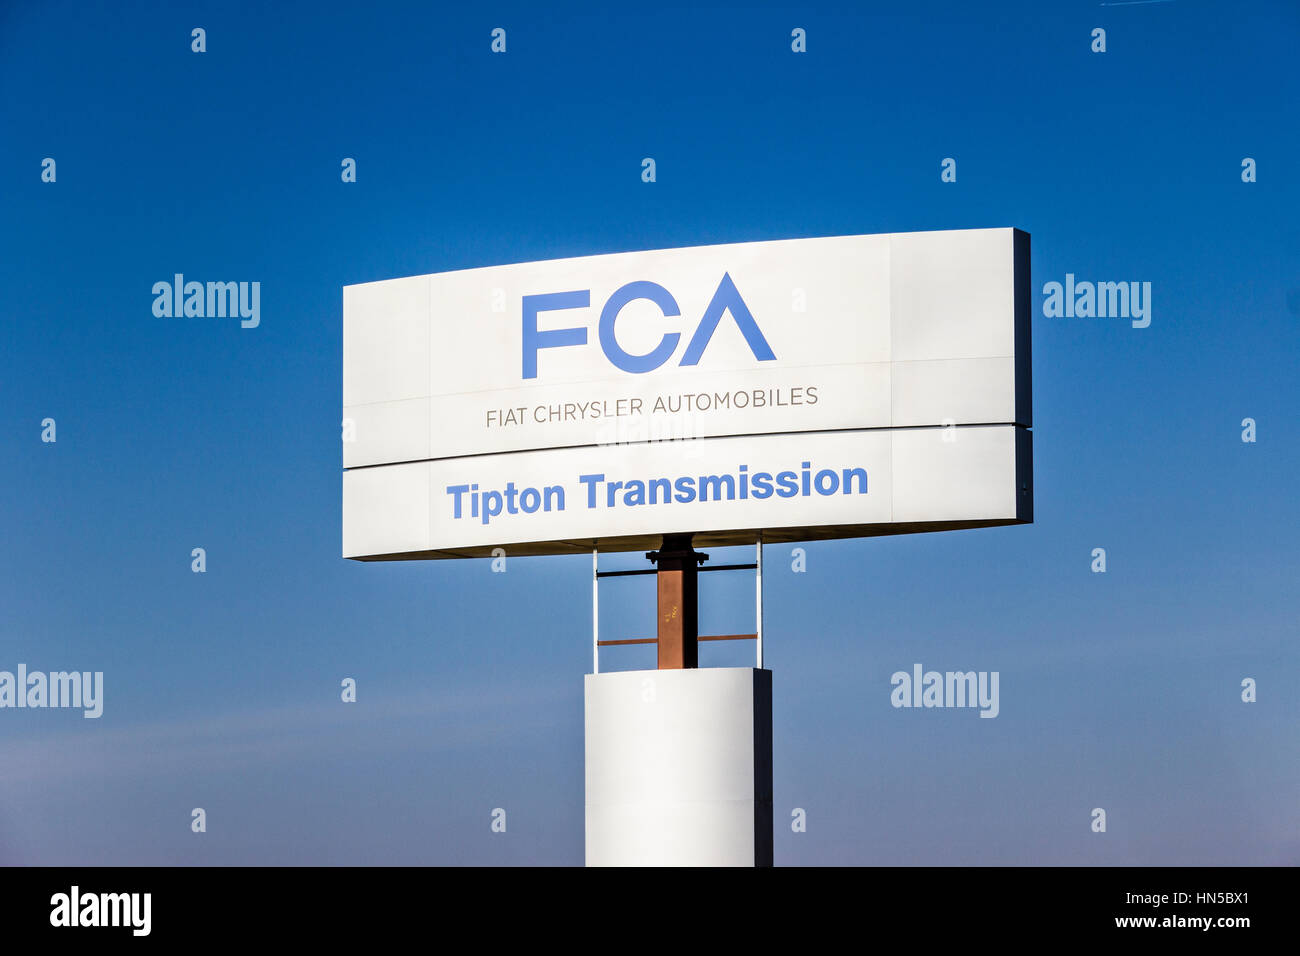 Indianapolis - Circa February 2017: FCA Fiat Chrysler Automobiles Transmission Plant. FCA sells vehicles under the Chrysler, Dodge, and Jeep brands IV Stock Photo